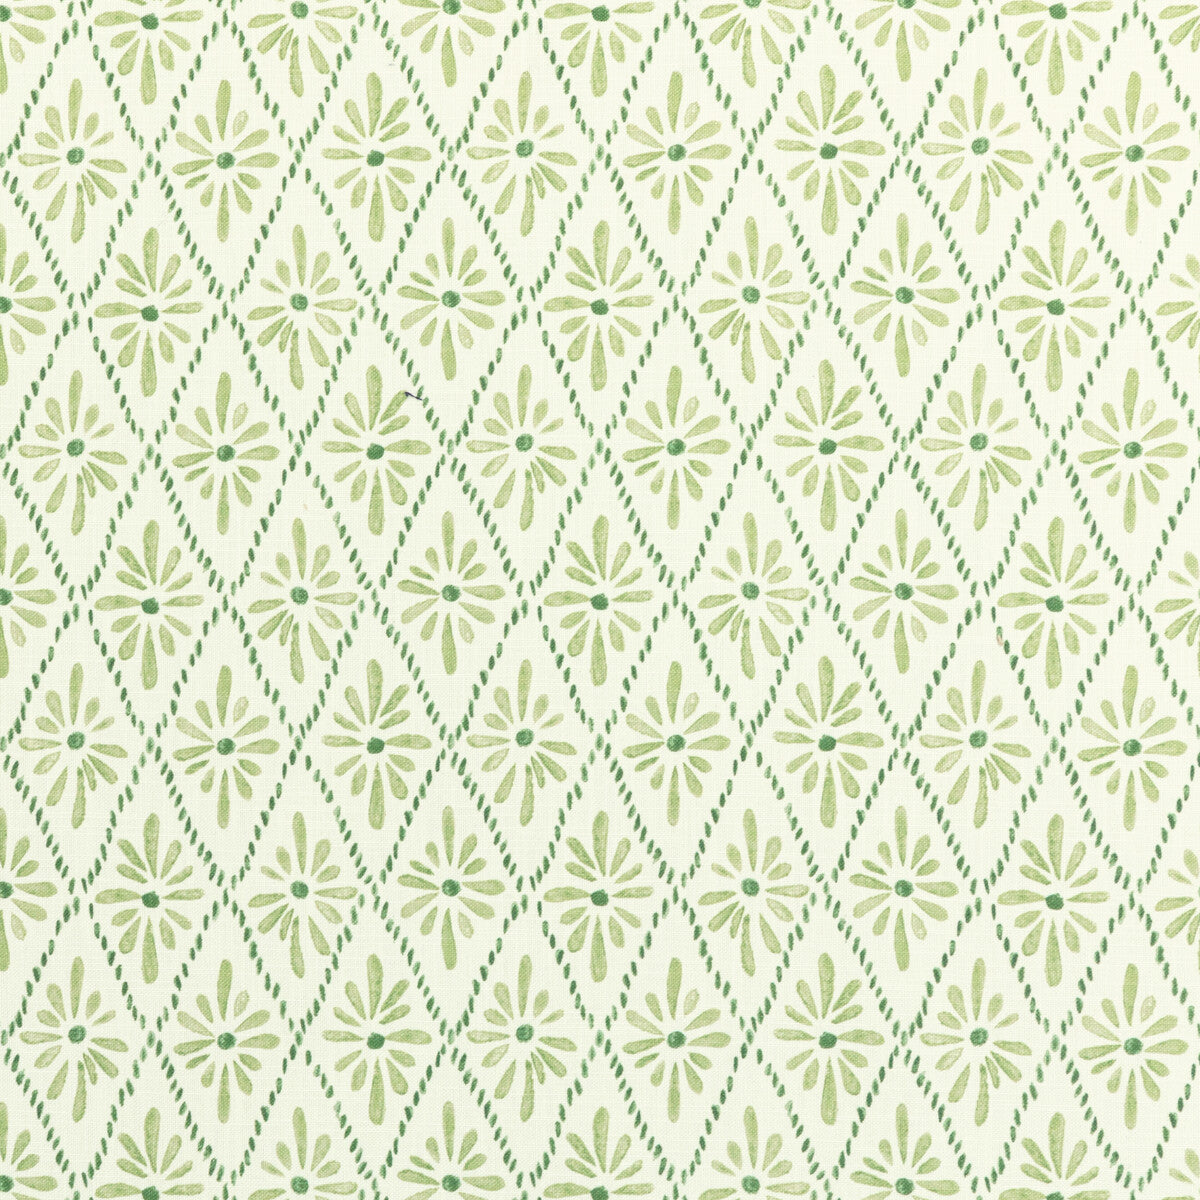 Malina fabric in grass color - pattern MALINA.13.0 - by Kravet Basics in the Monterey collection